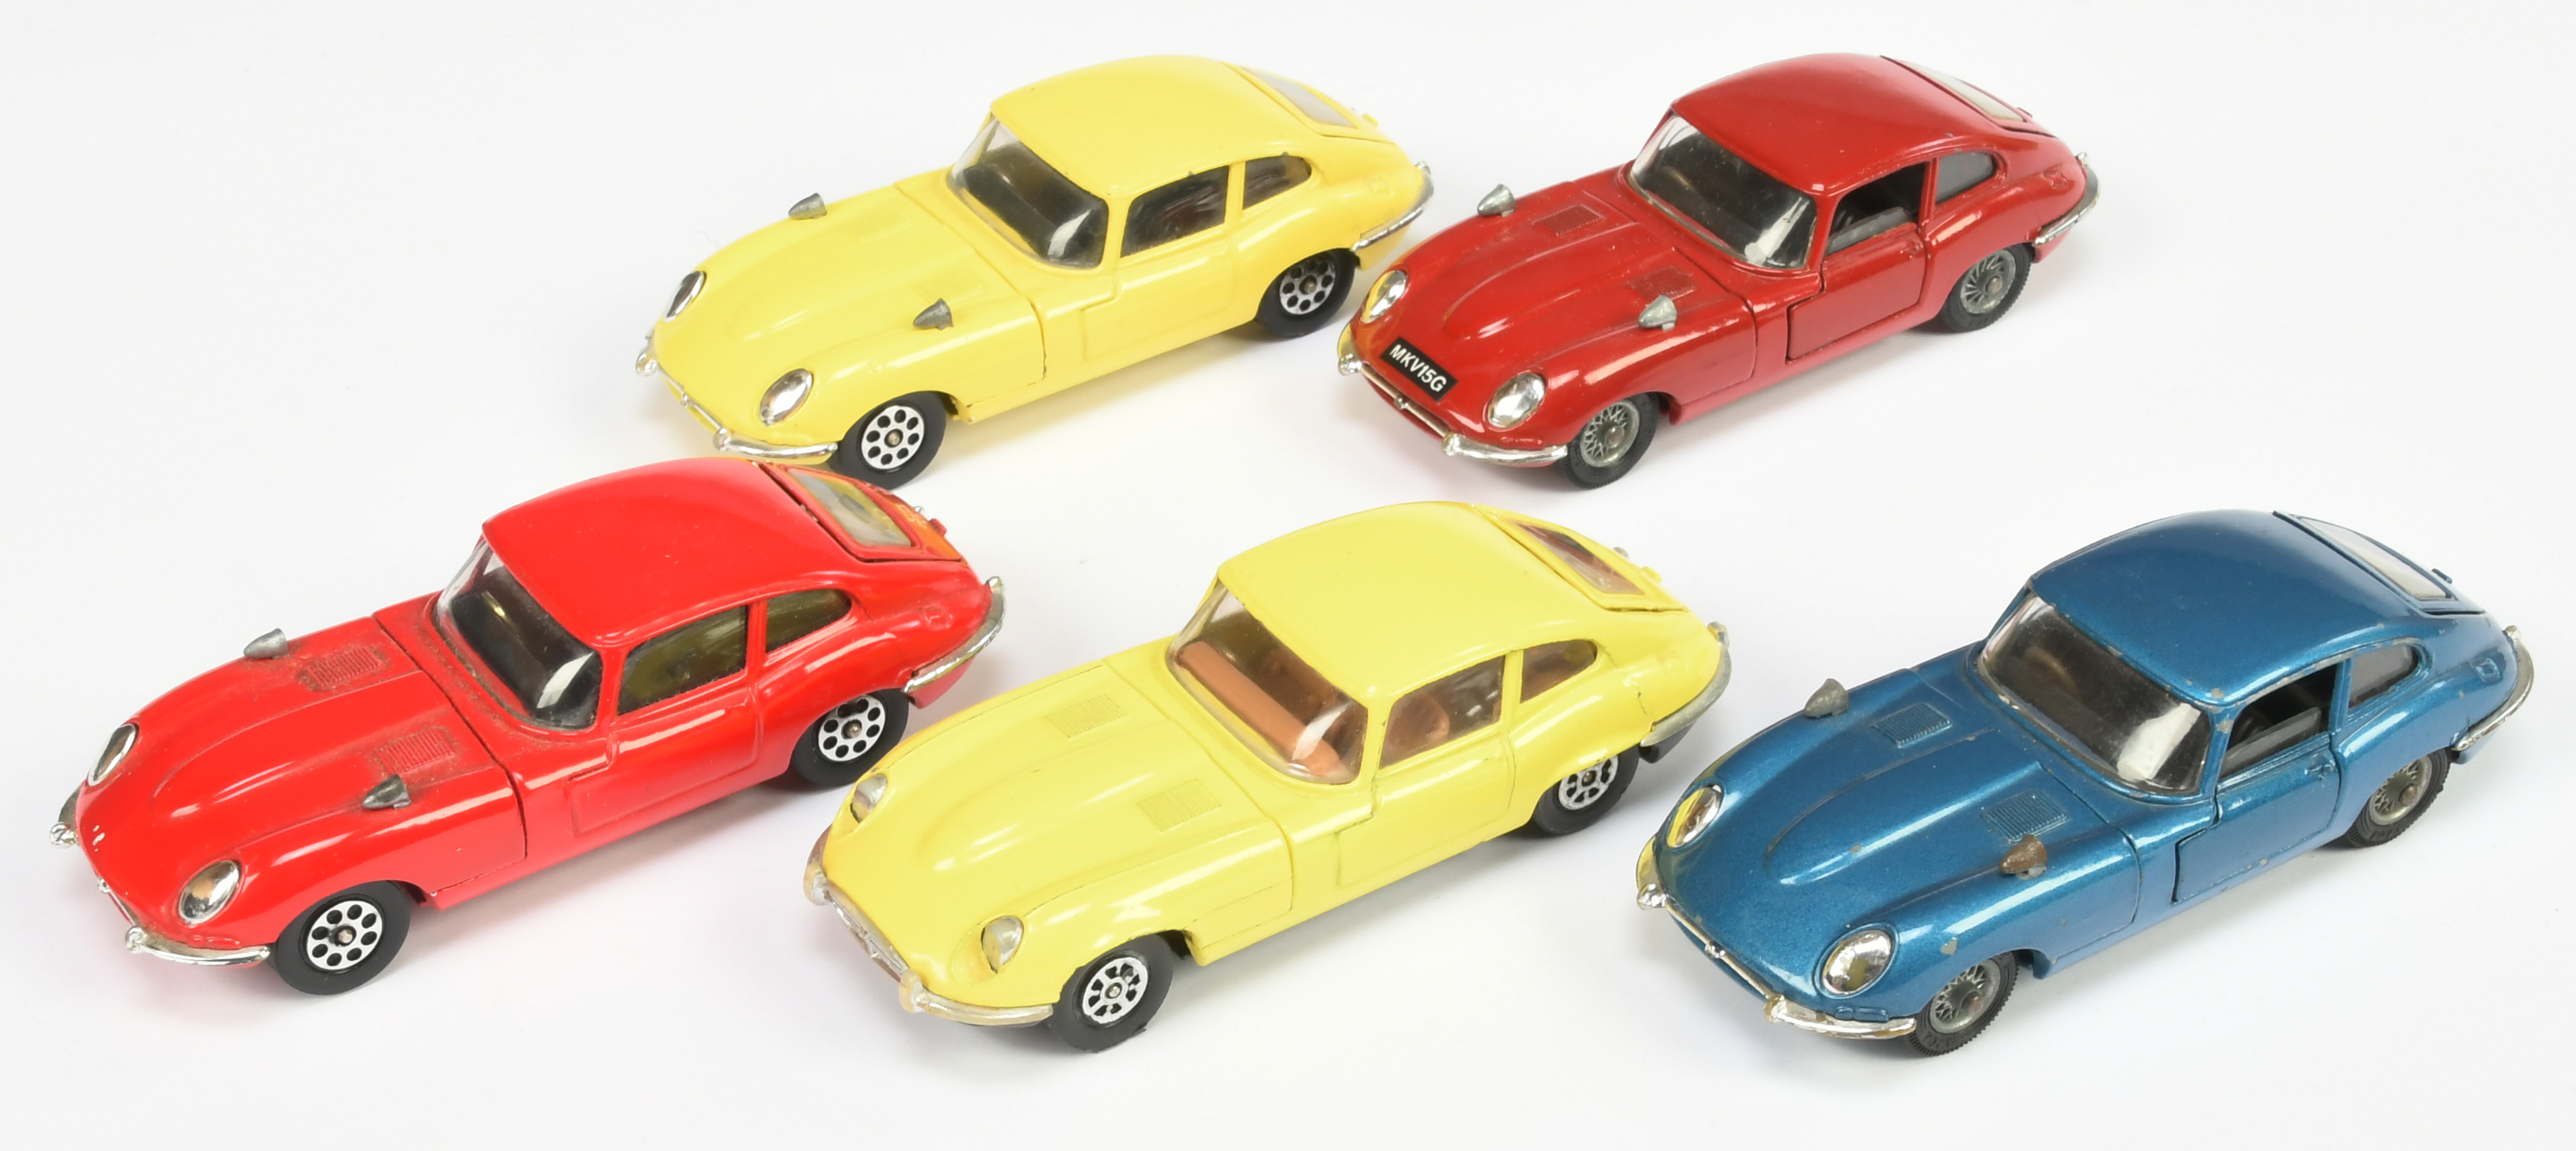 Corgi Toys Unboxed Of Jaguar Type E To Include - (1) Blue body, wire wheels, (2) Same but red, (3...